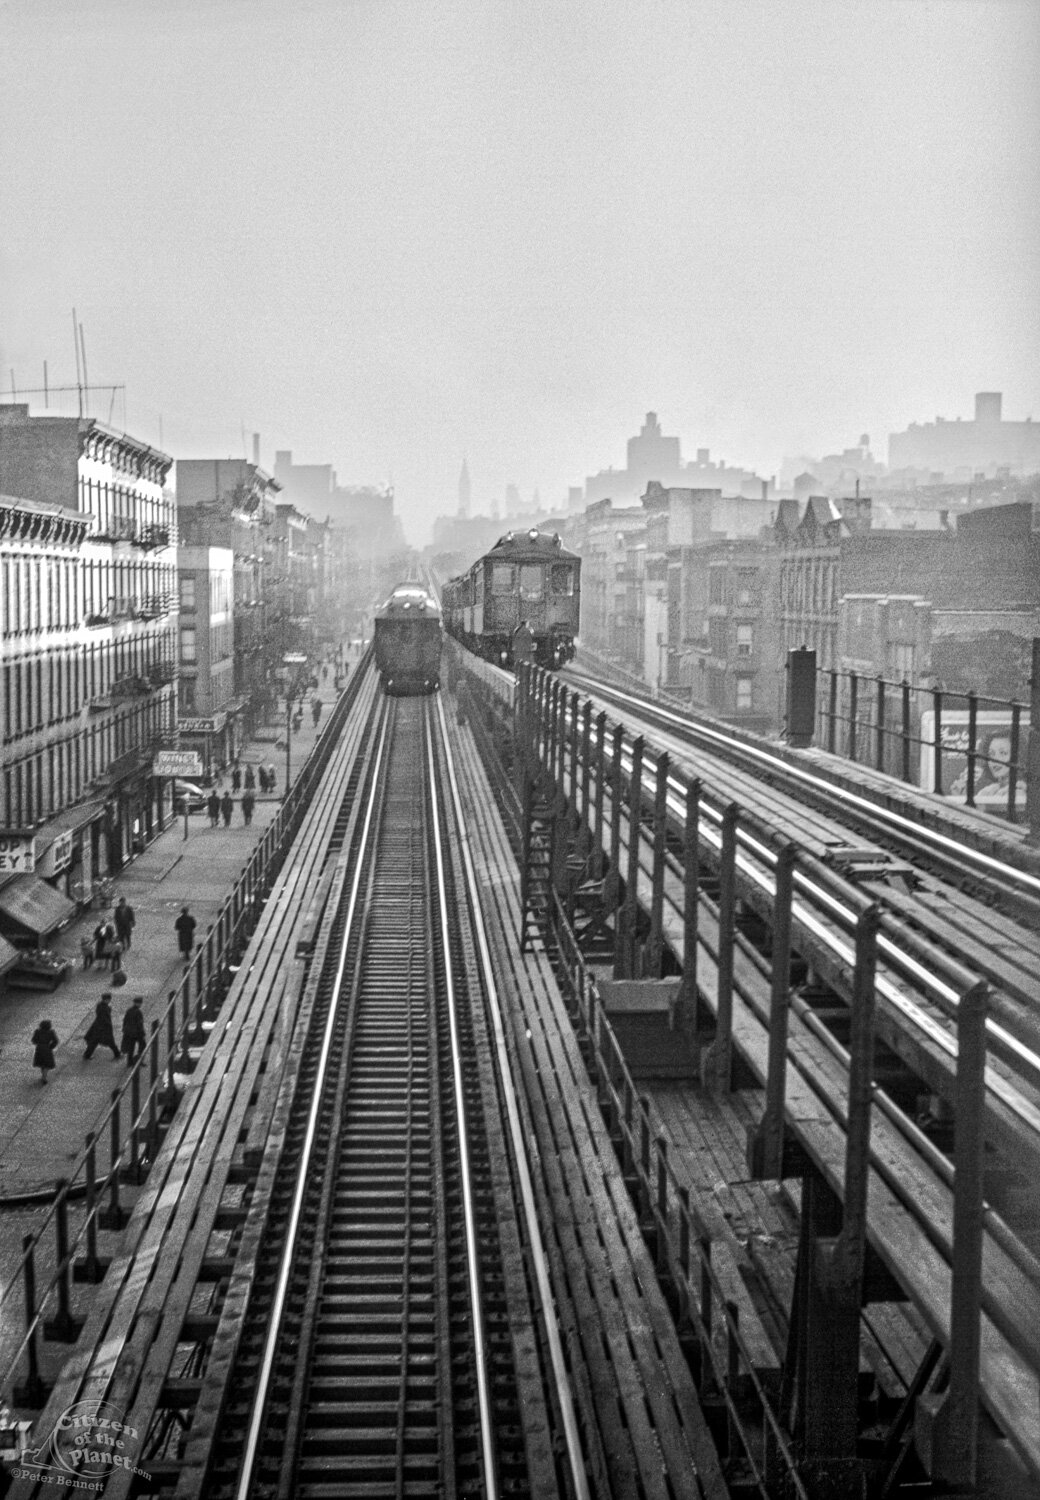 125th Street Elevated Subway, 1948